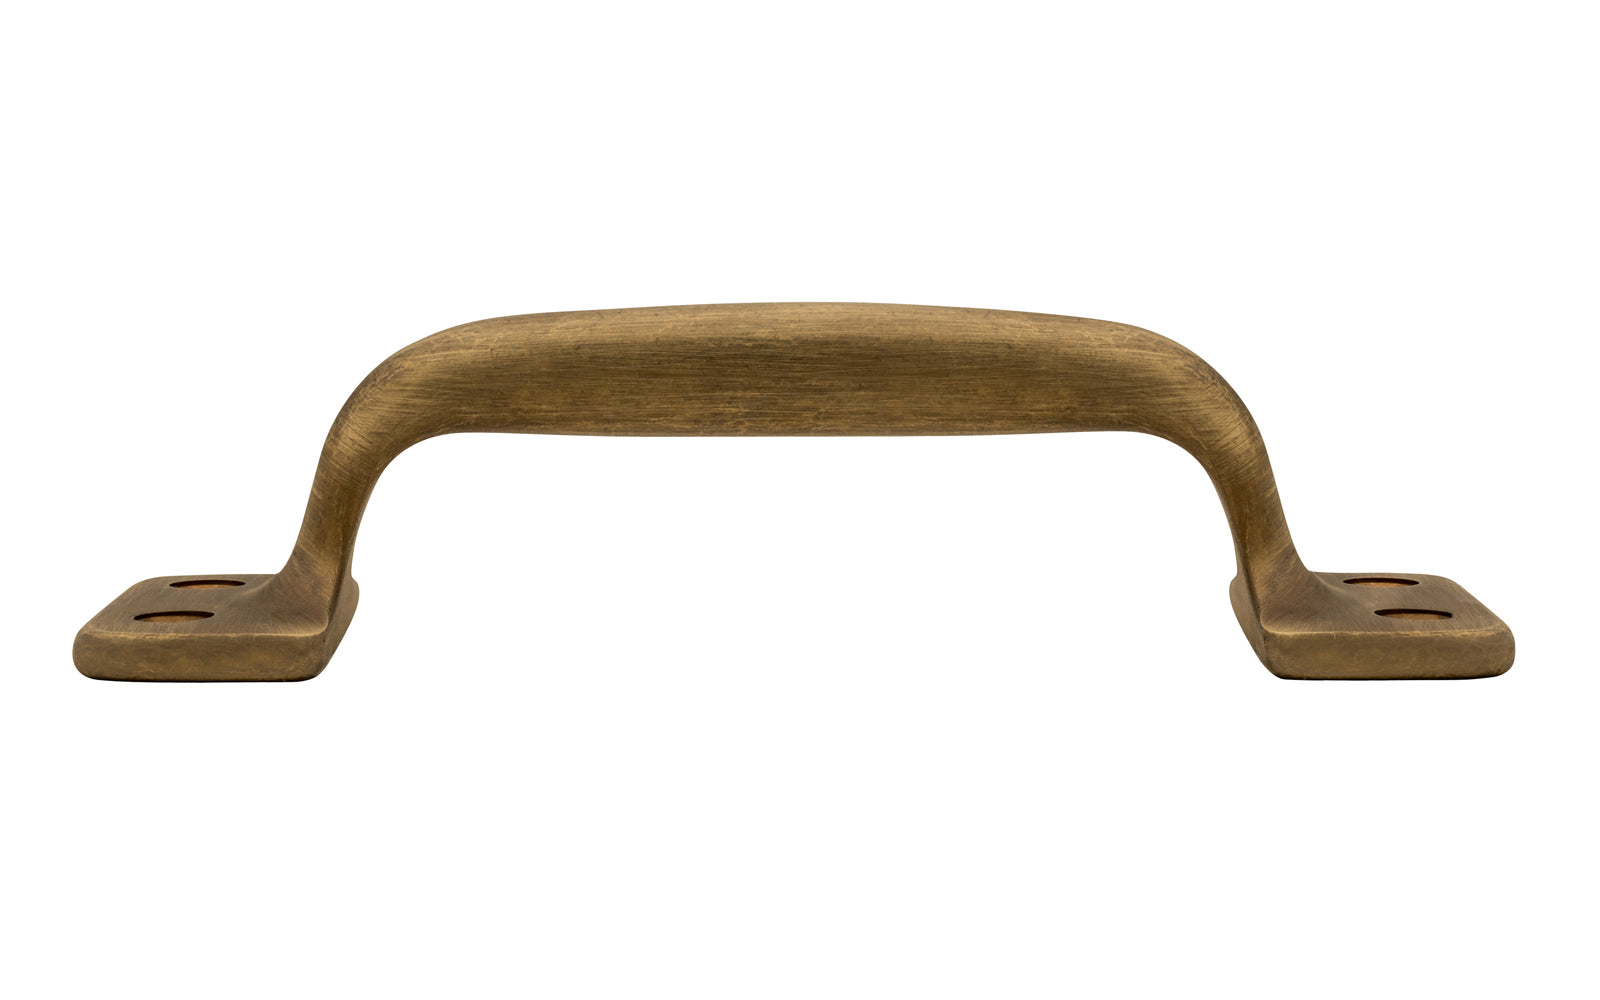 Vintage-style Hardware · Classic Solid Brass Handle Pull ~ 4-3/8" On Centers. Versatile handle is great for sash windows, cabinets, drawers, file cabinets. Arts & Crafts handle pull. Antique Brass Finish.